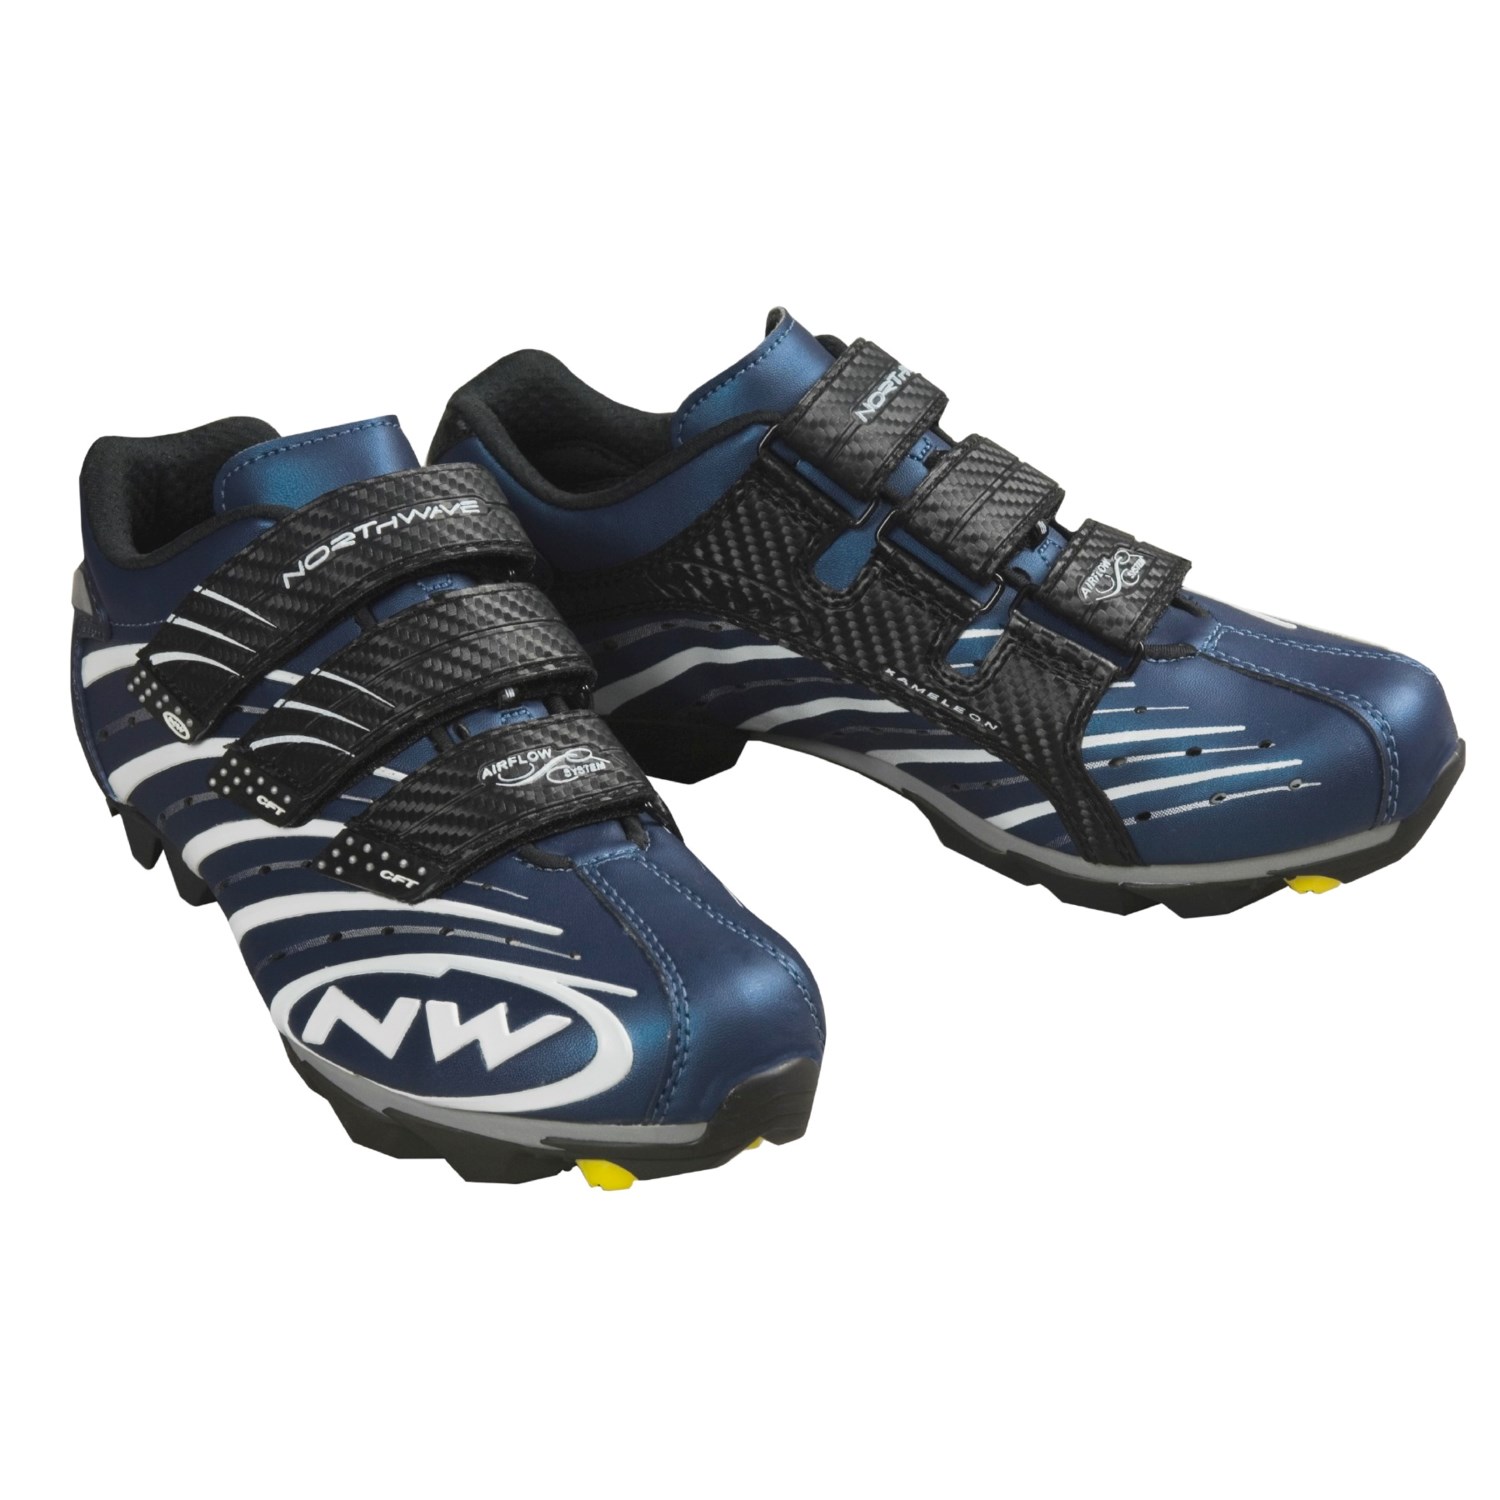 Northwave MTB Cycling Shoes (For Men) 96216 Save 51